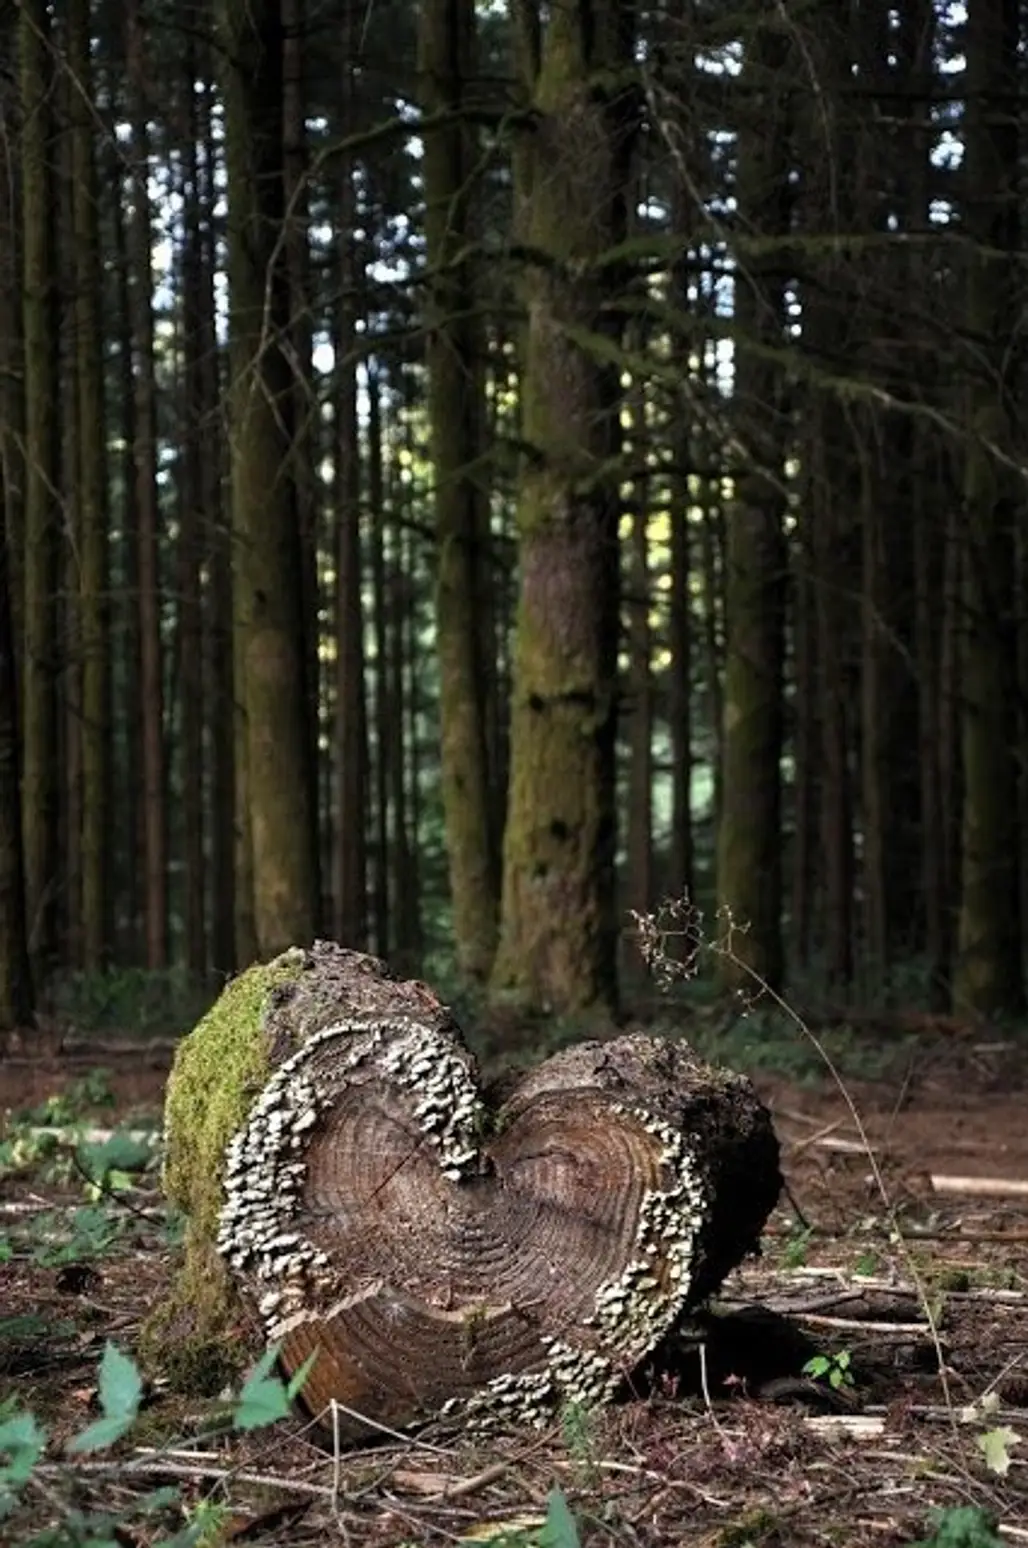 The Heart of the Forest